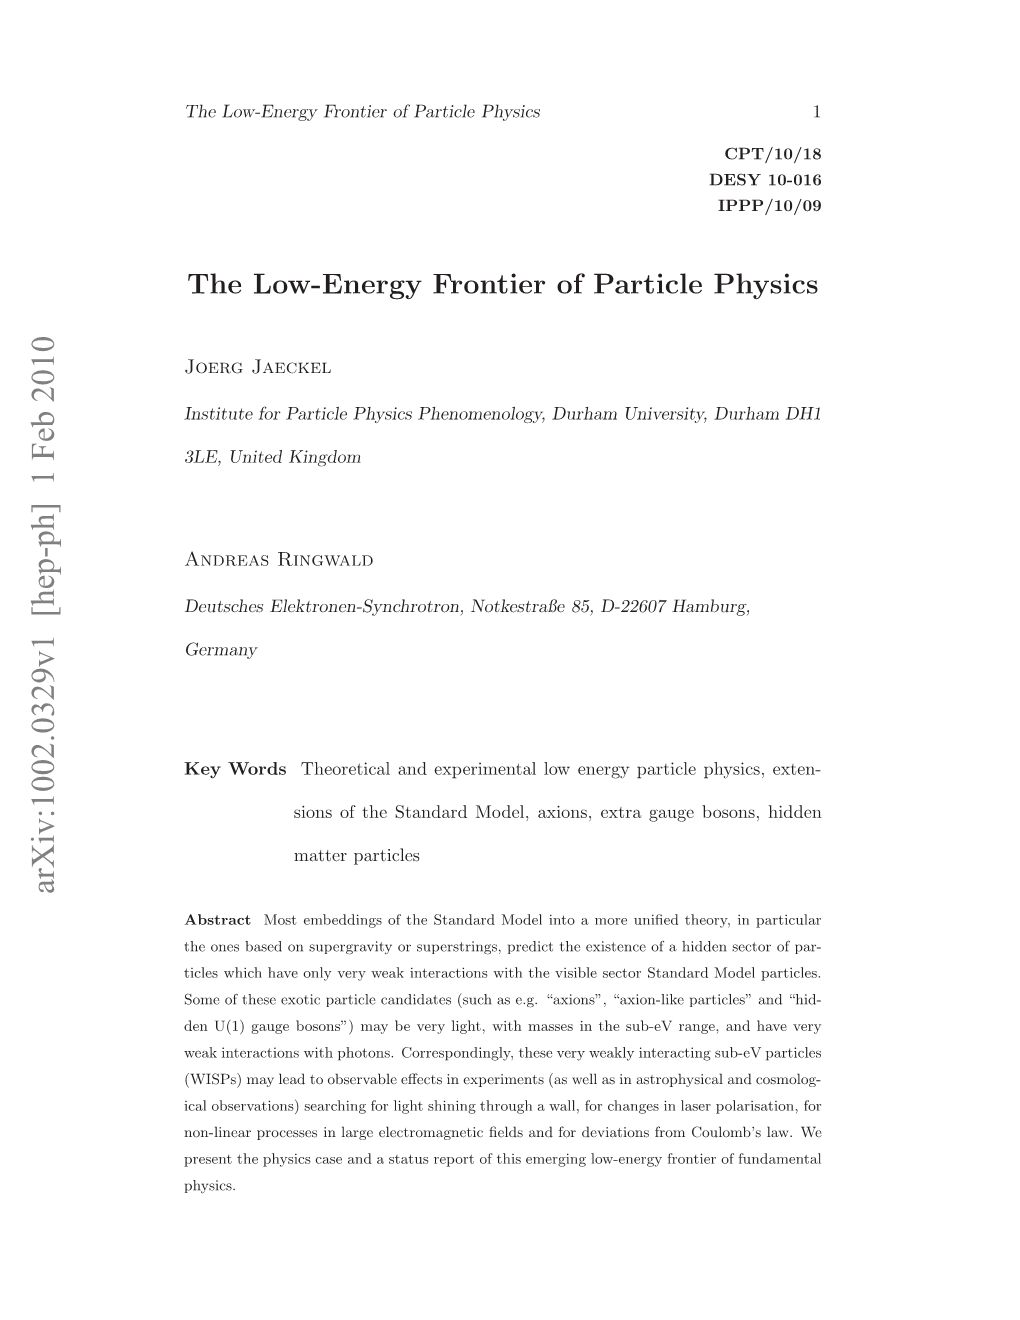 The Low-Energy Frontier of Particle Physics